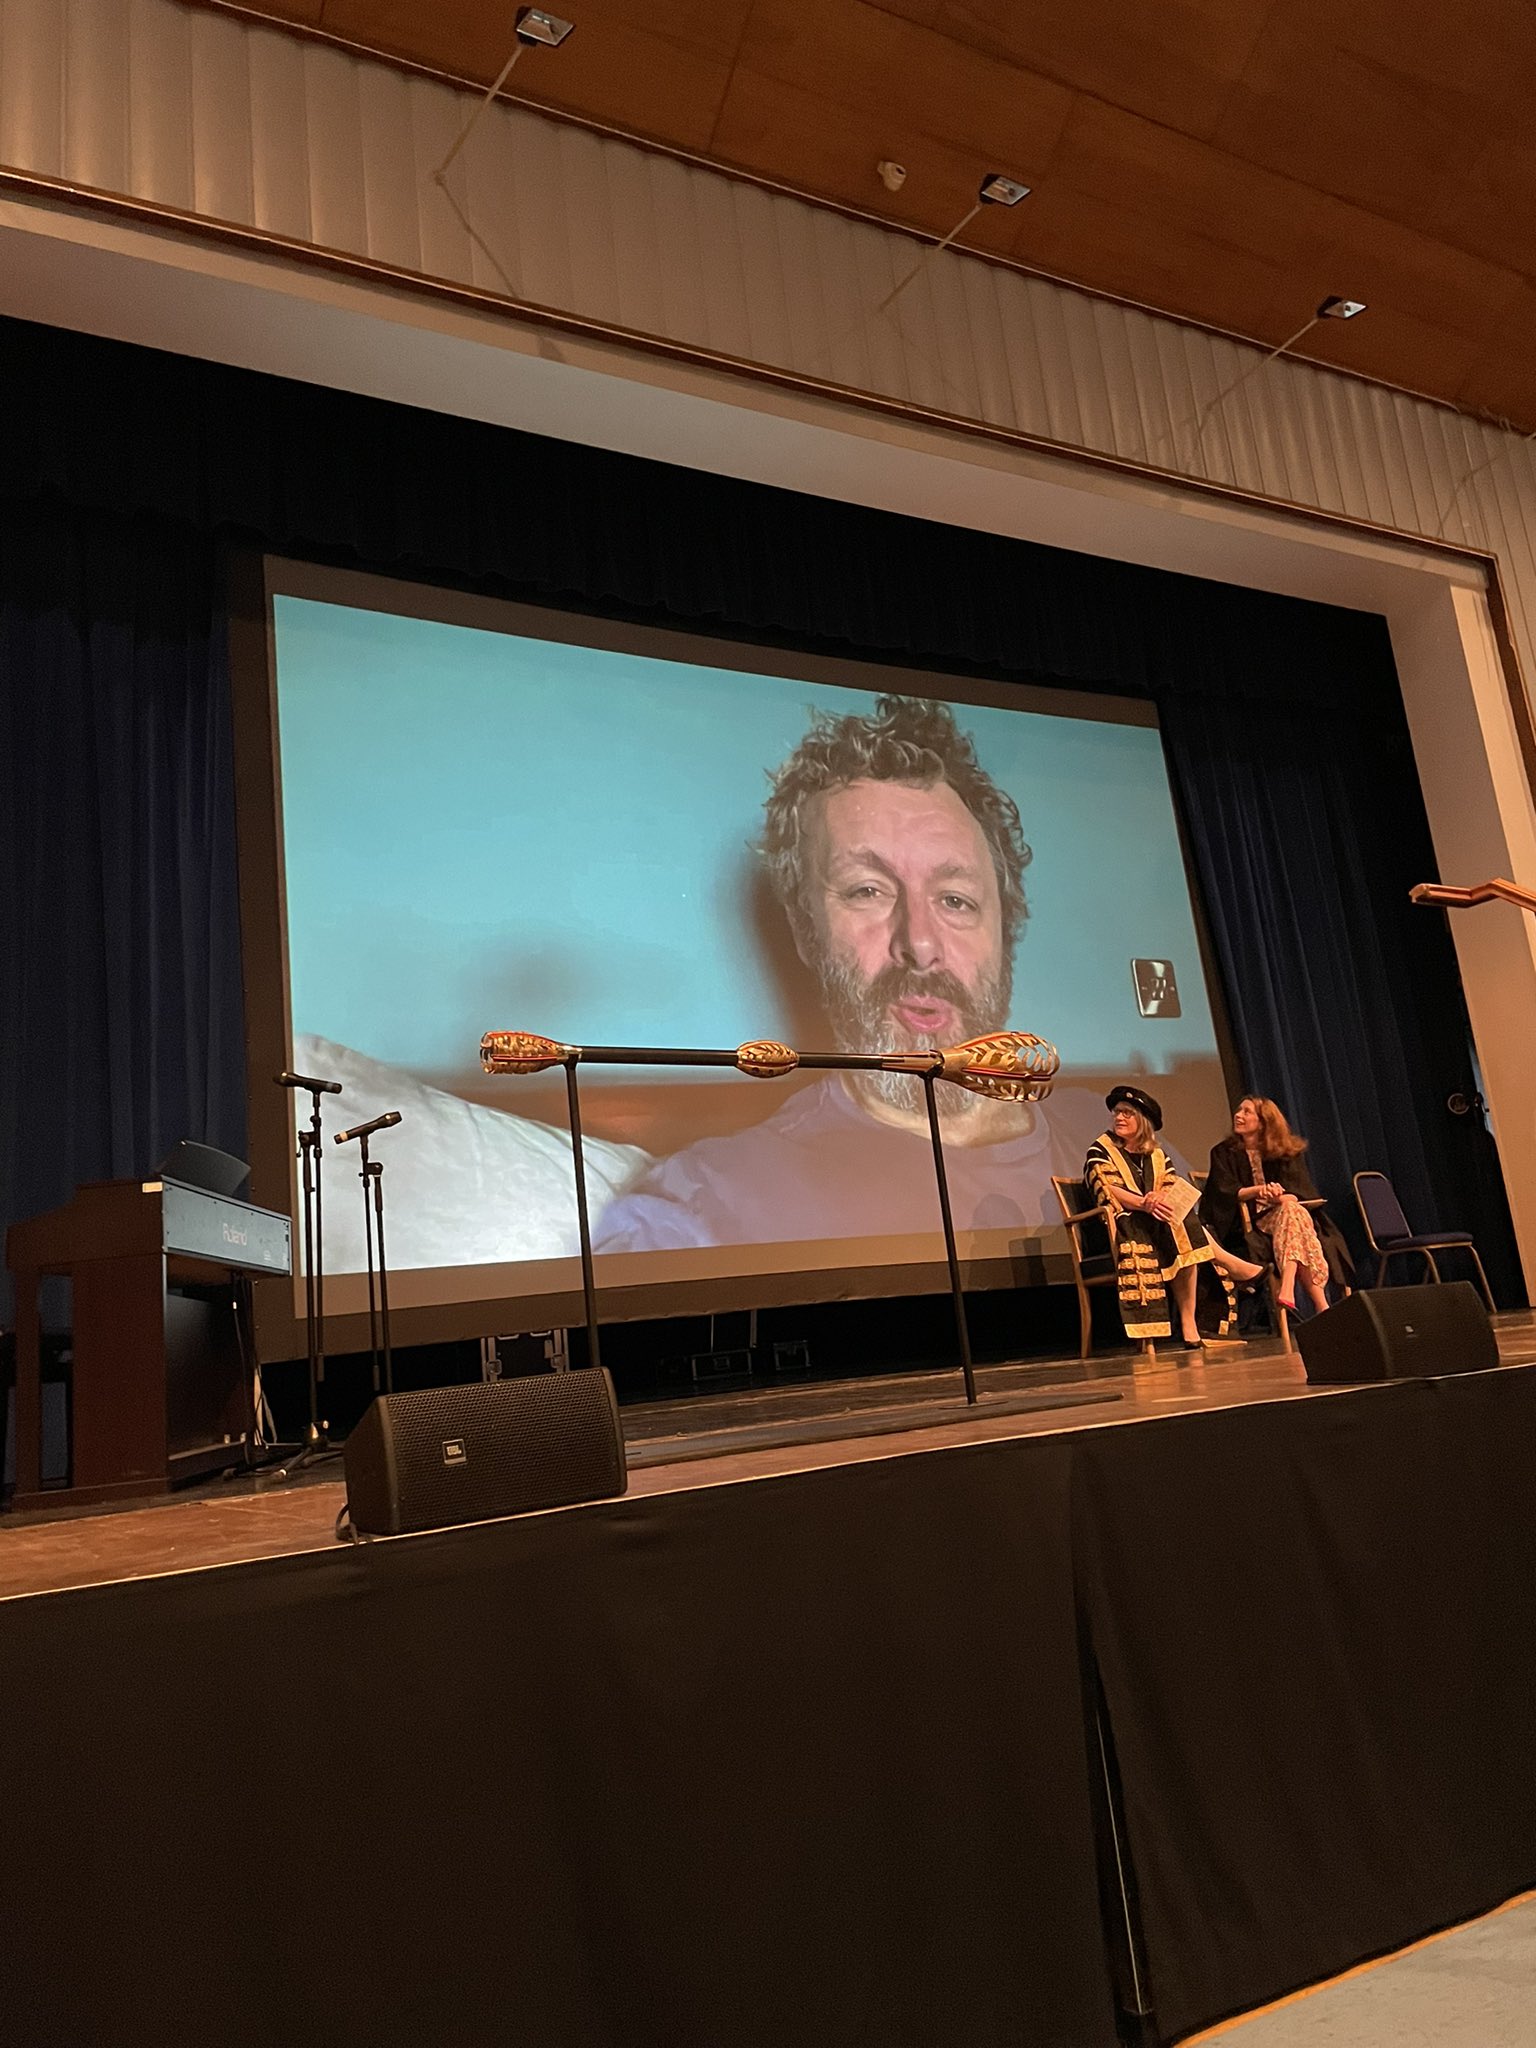 Michael Sheen on screen on stage at William Aston Hall